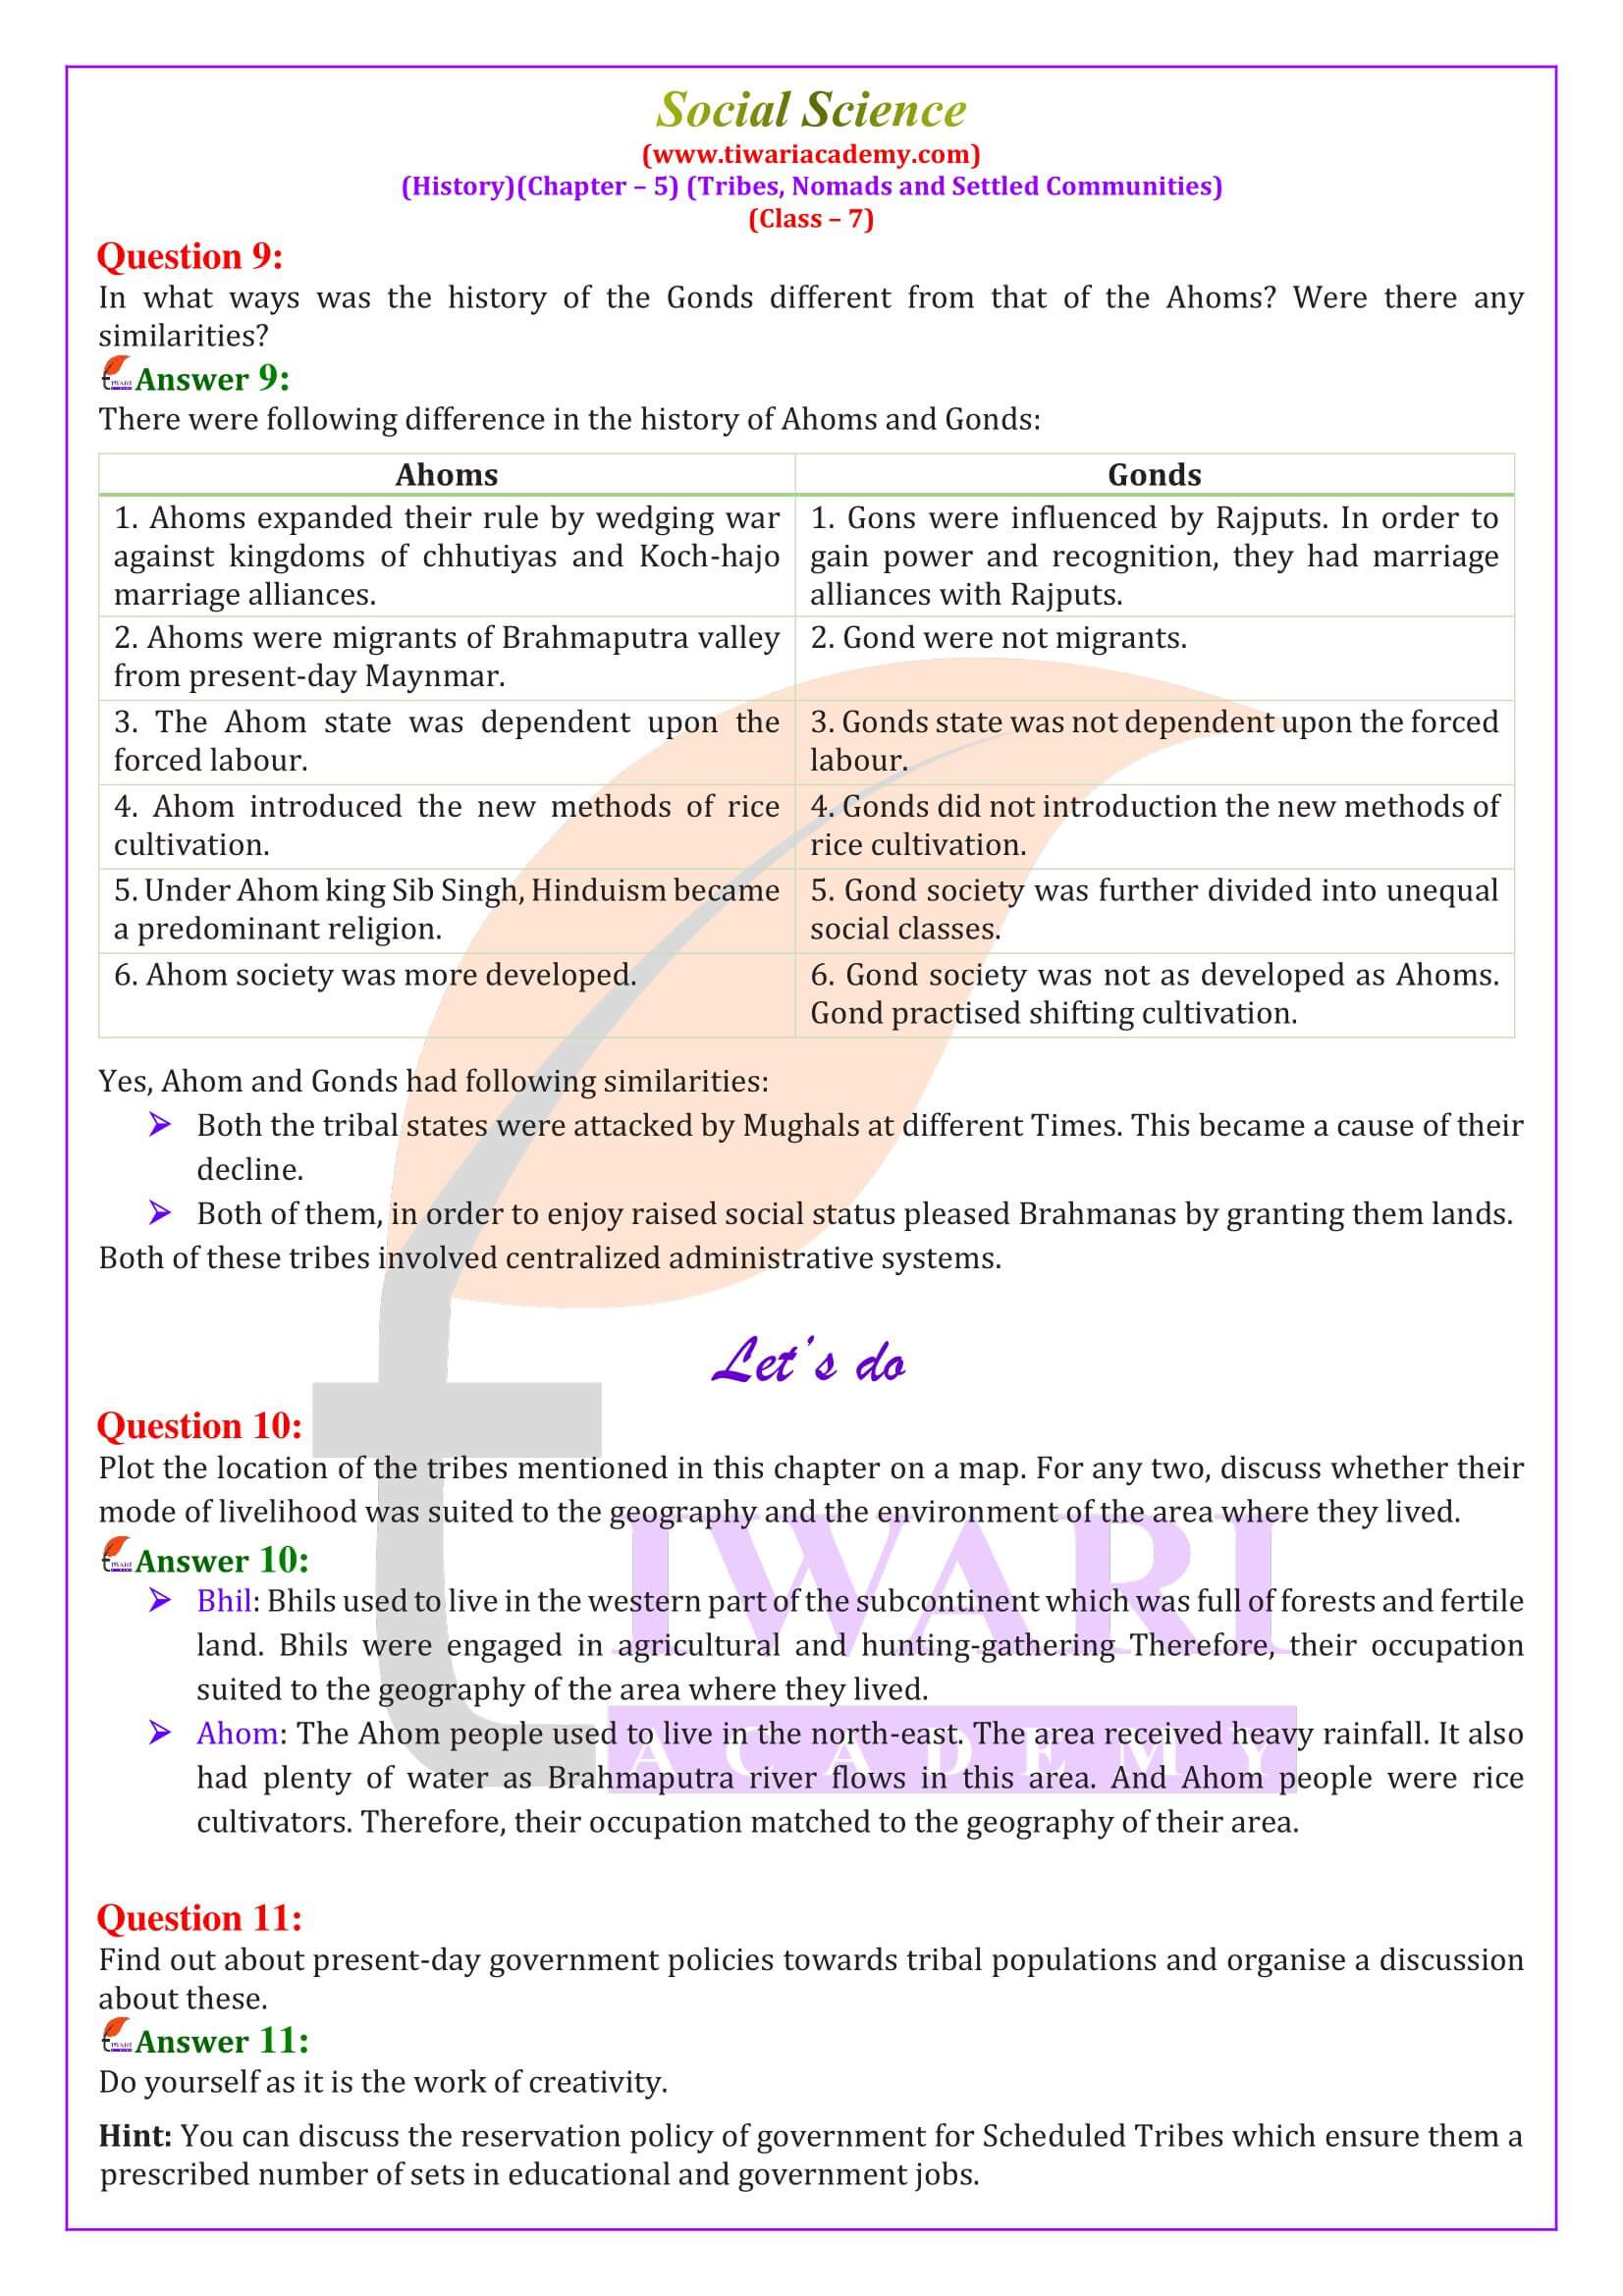 NCERT Solutions for Class 7 Social Science History Chapter 5